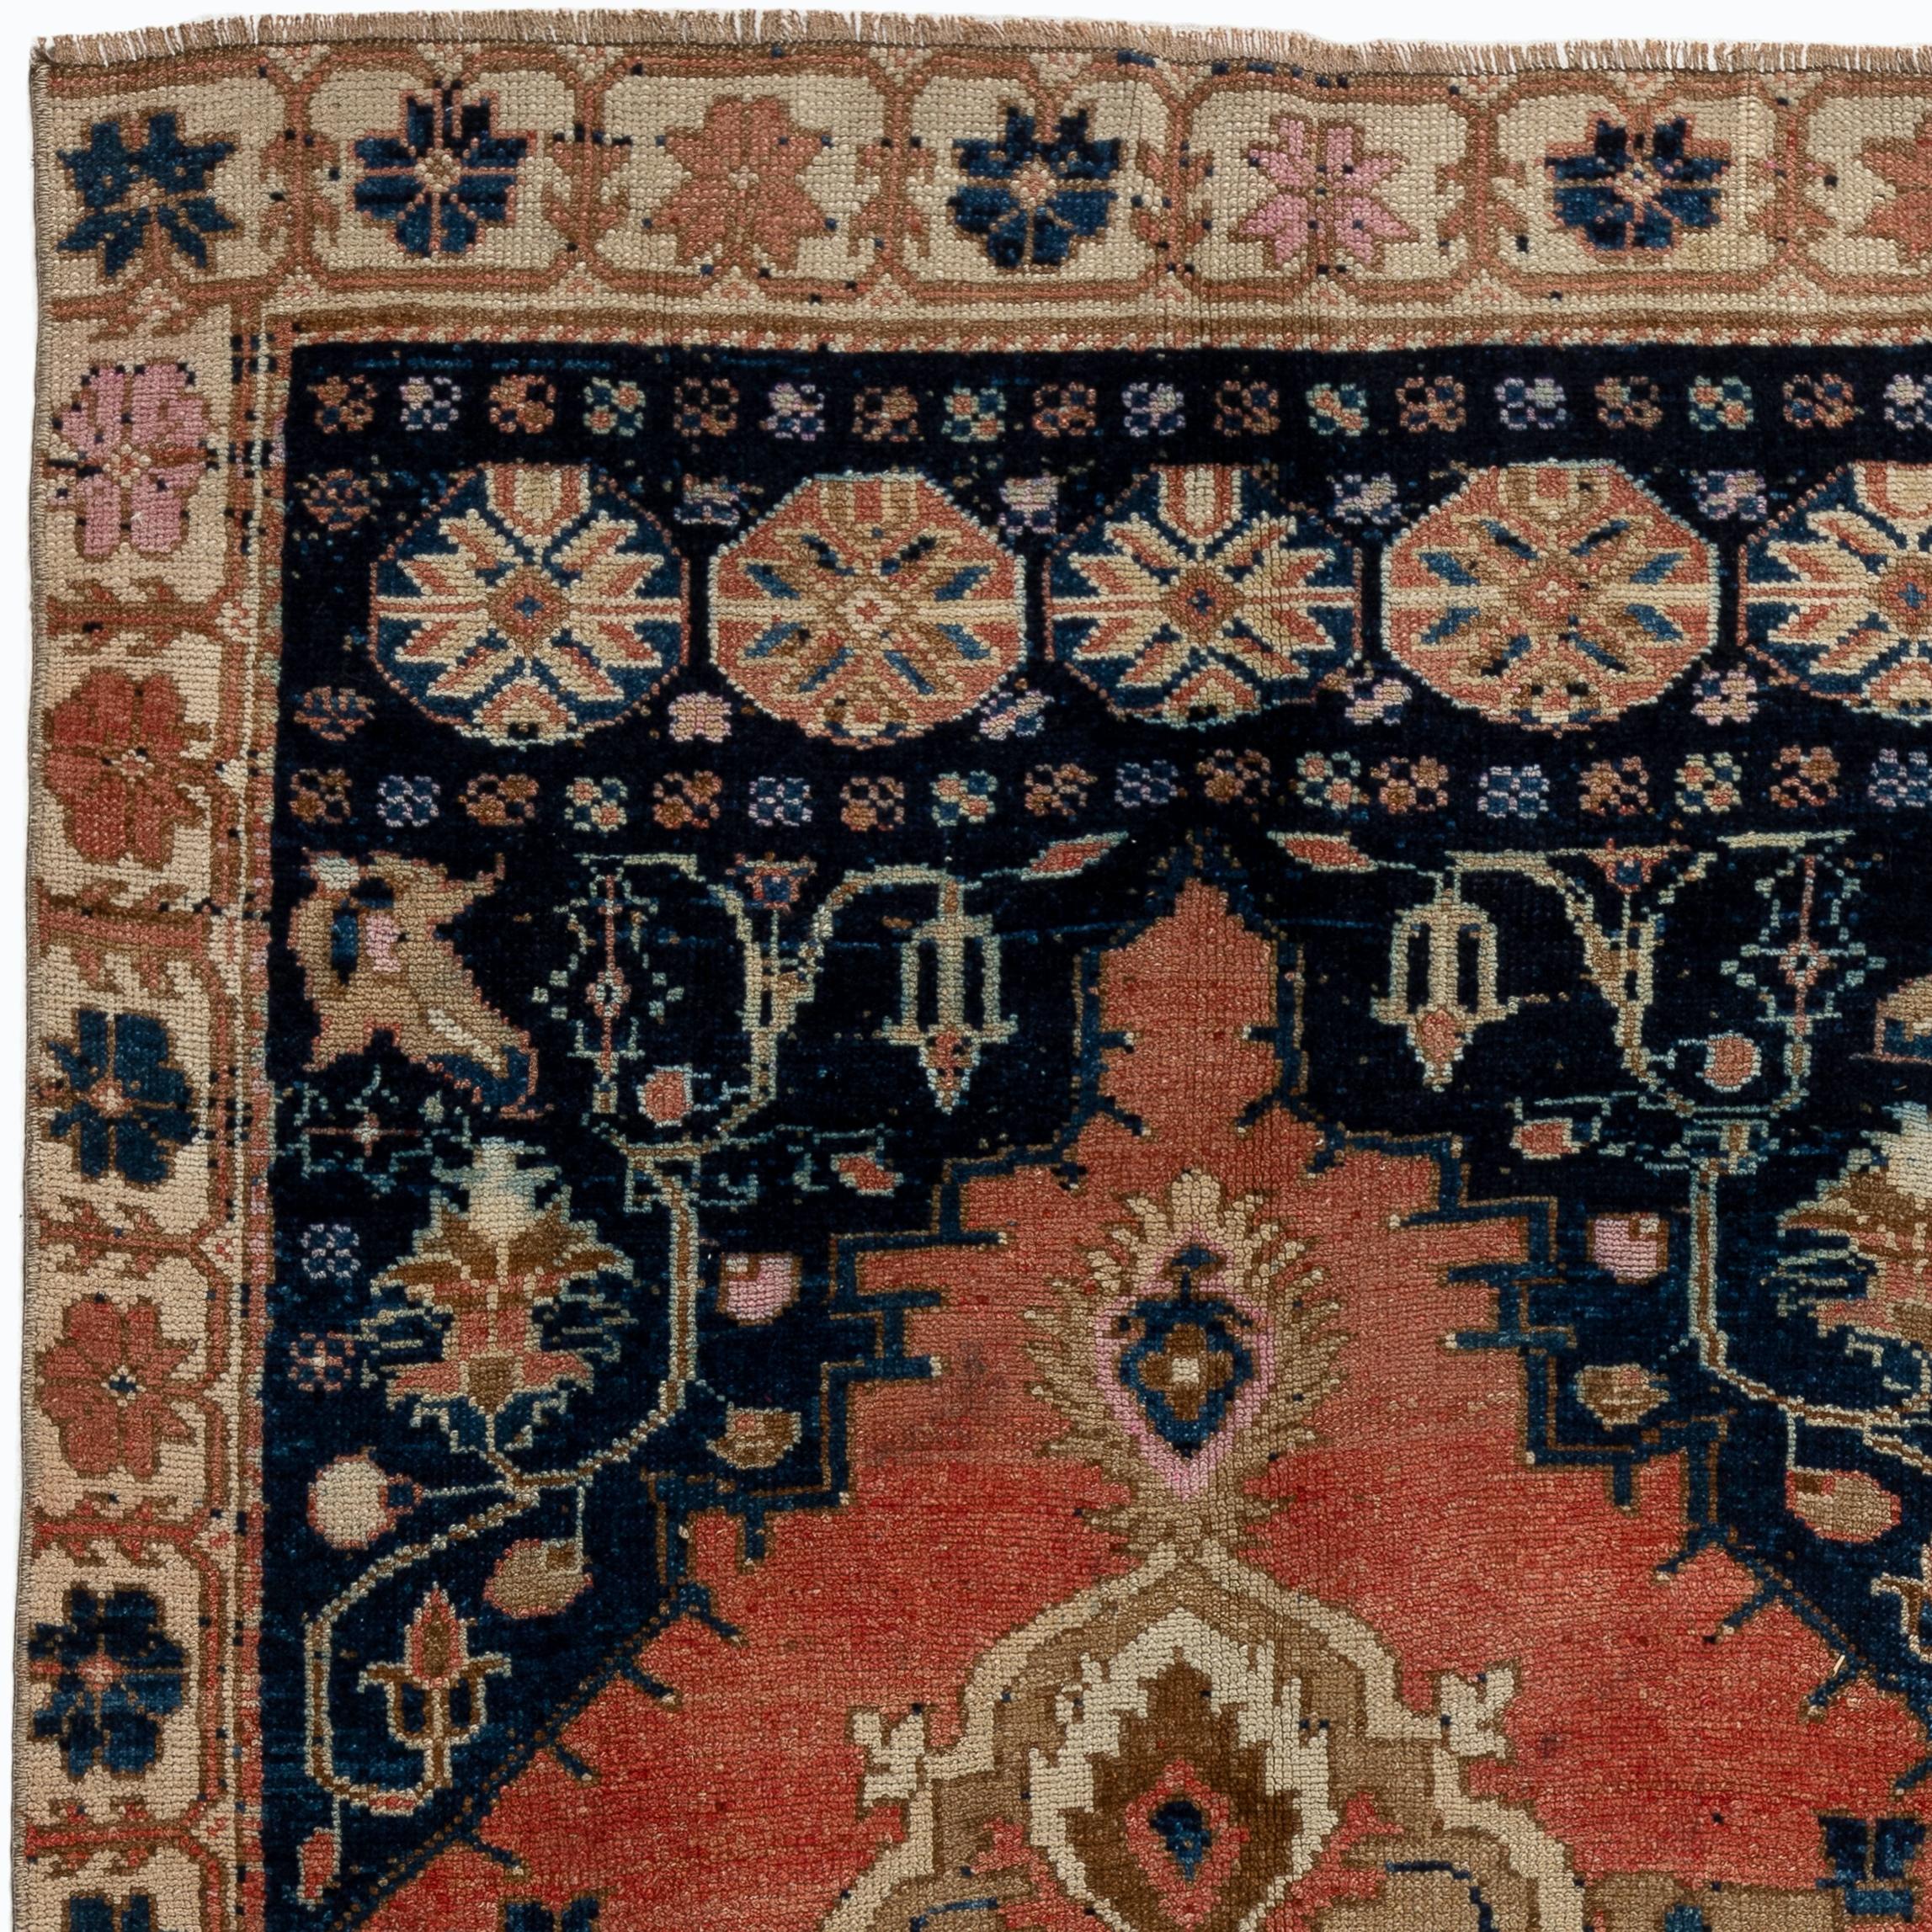 A finely hand-knotted one of a kind vintage Turkish rug from 1920s.
The rug is made of plant dyed medium wool pile on wool foundation. The red is dyed with madder and the blue is indigo. 

The rug is clean and sturdy, it can be used in both